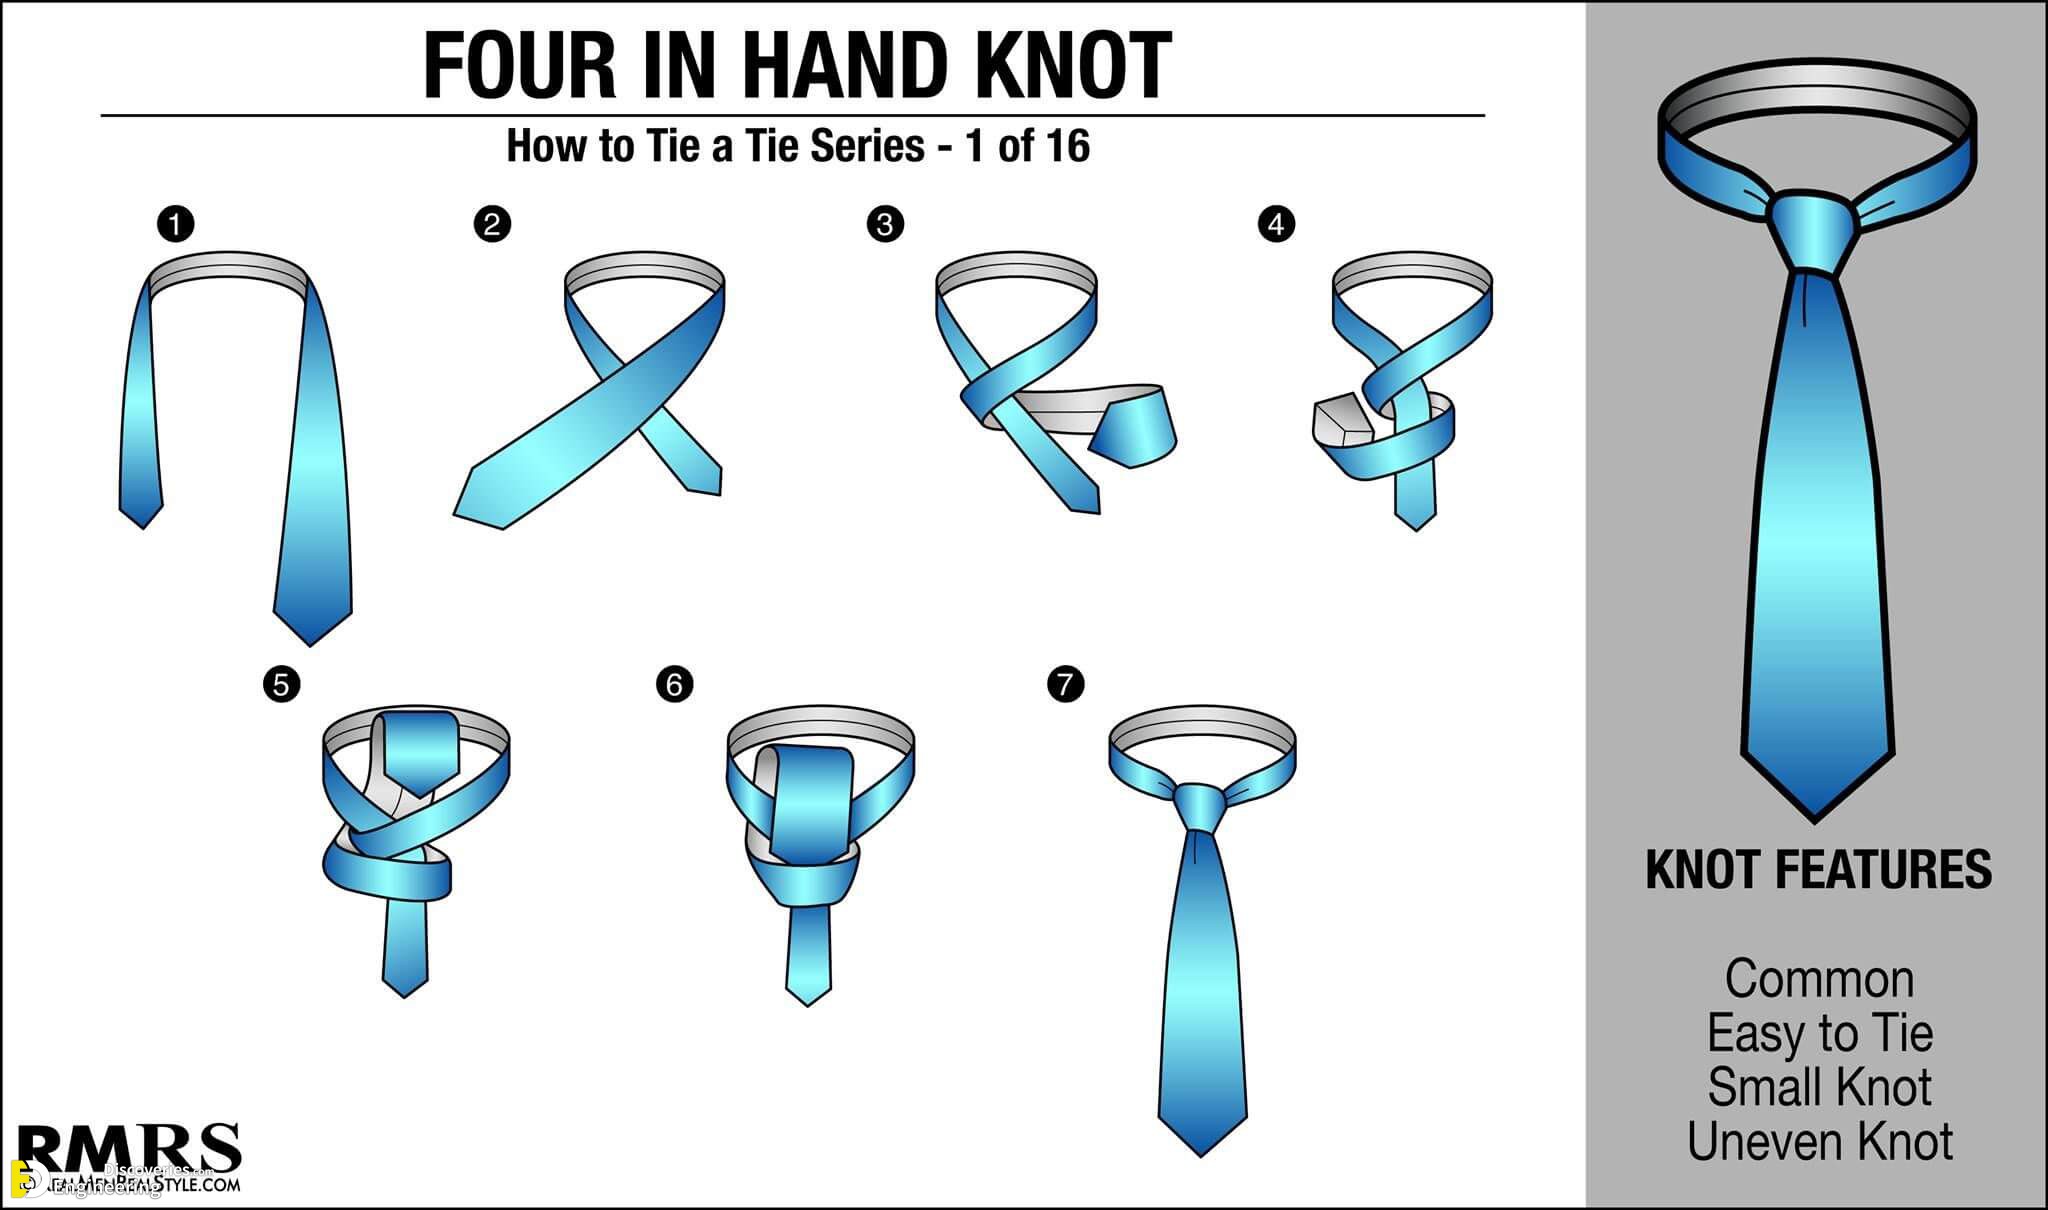 17 Different Stunning Ways To Tie A Tie Knot Step By Step | Engineering ...